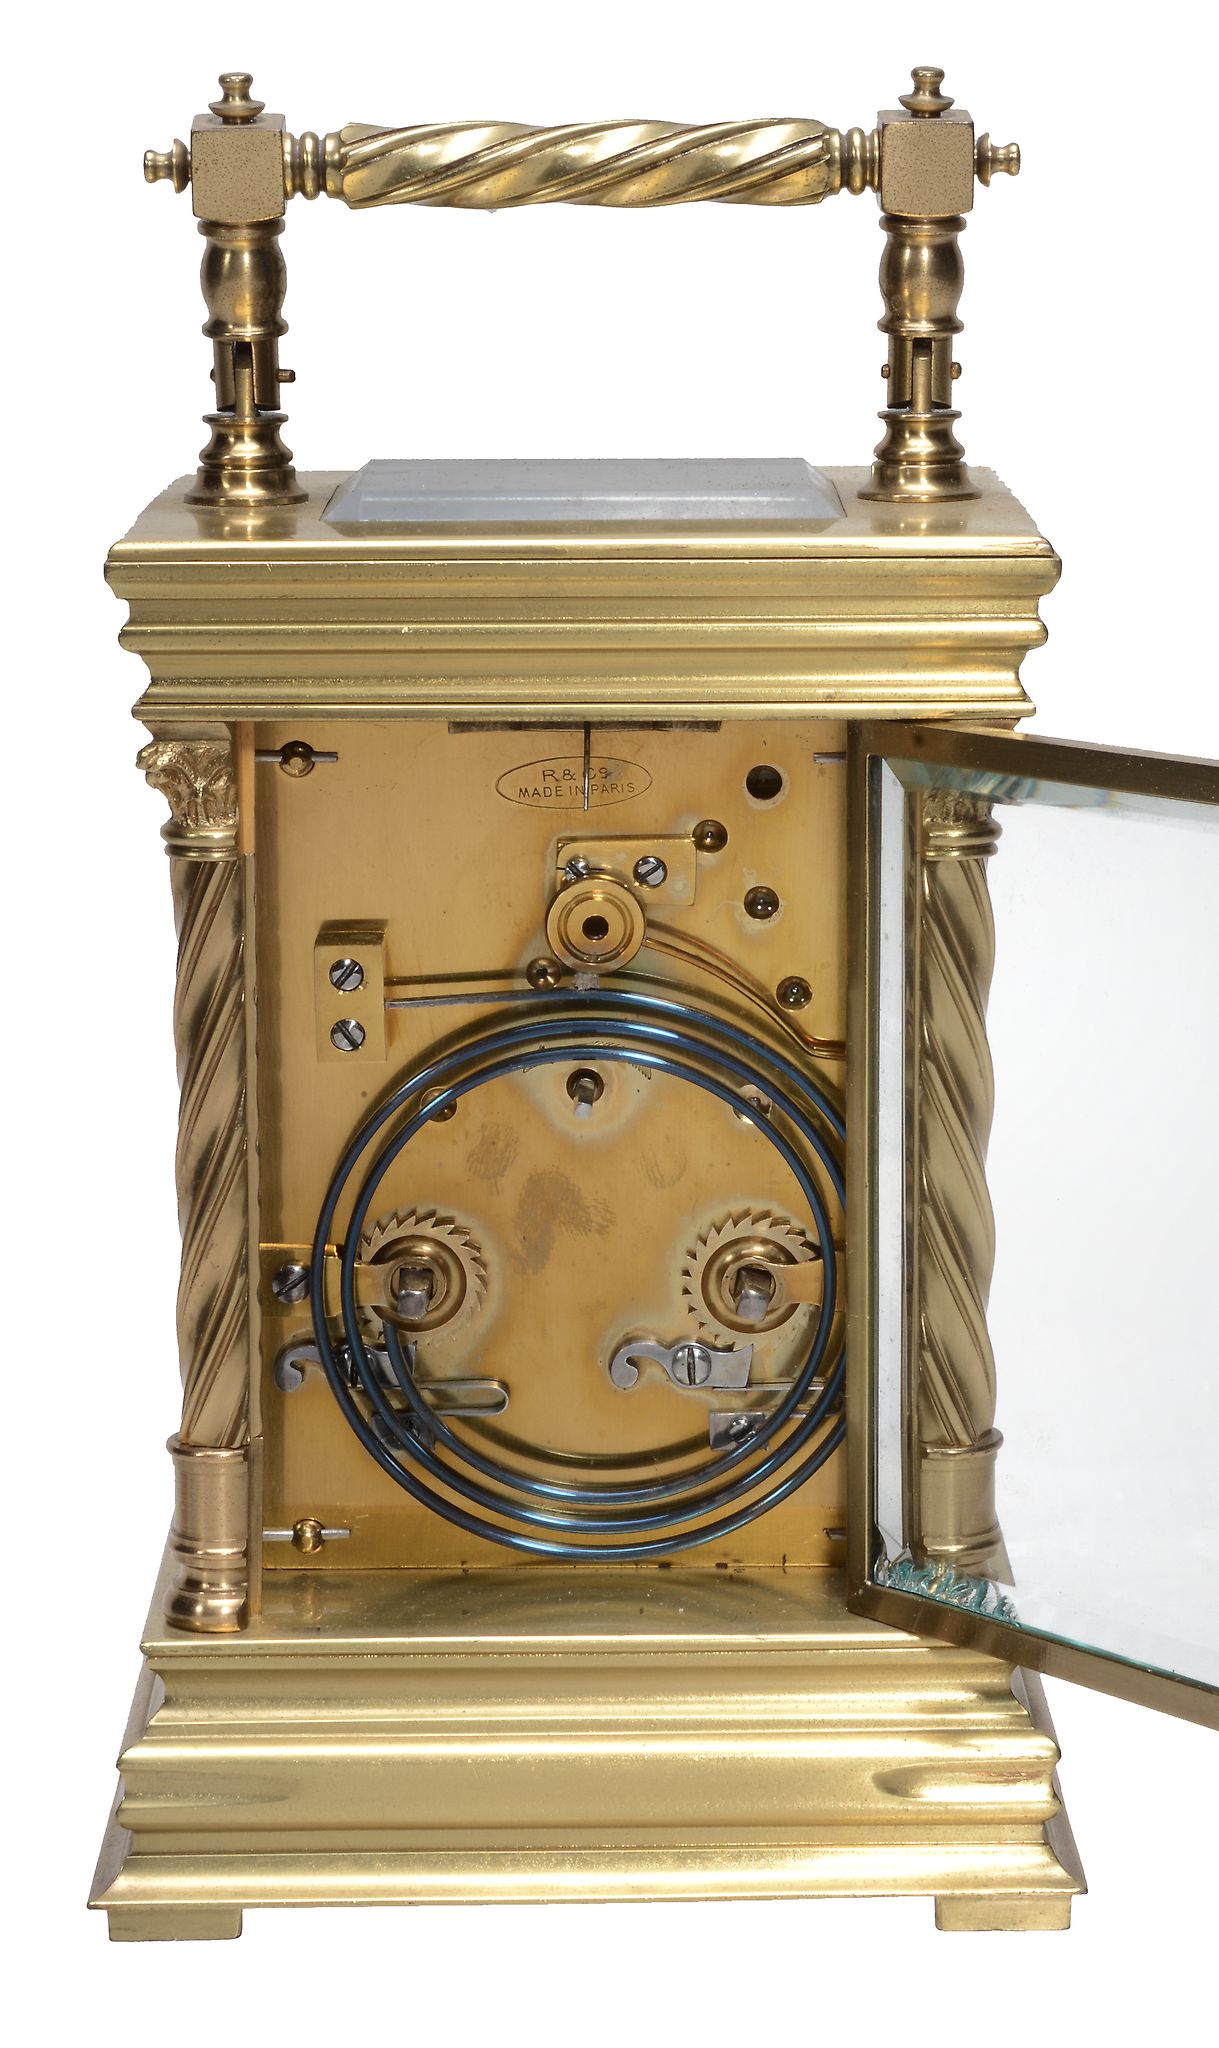 A French lacquered brass carriage clock, Richard and Company, Paris - Image 2 of 3